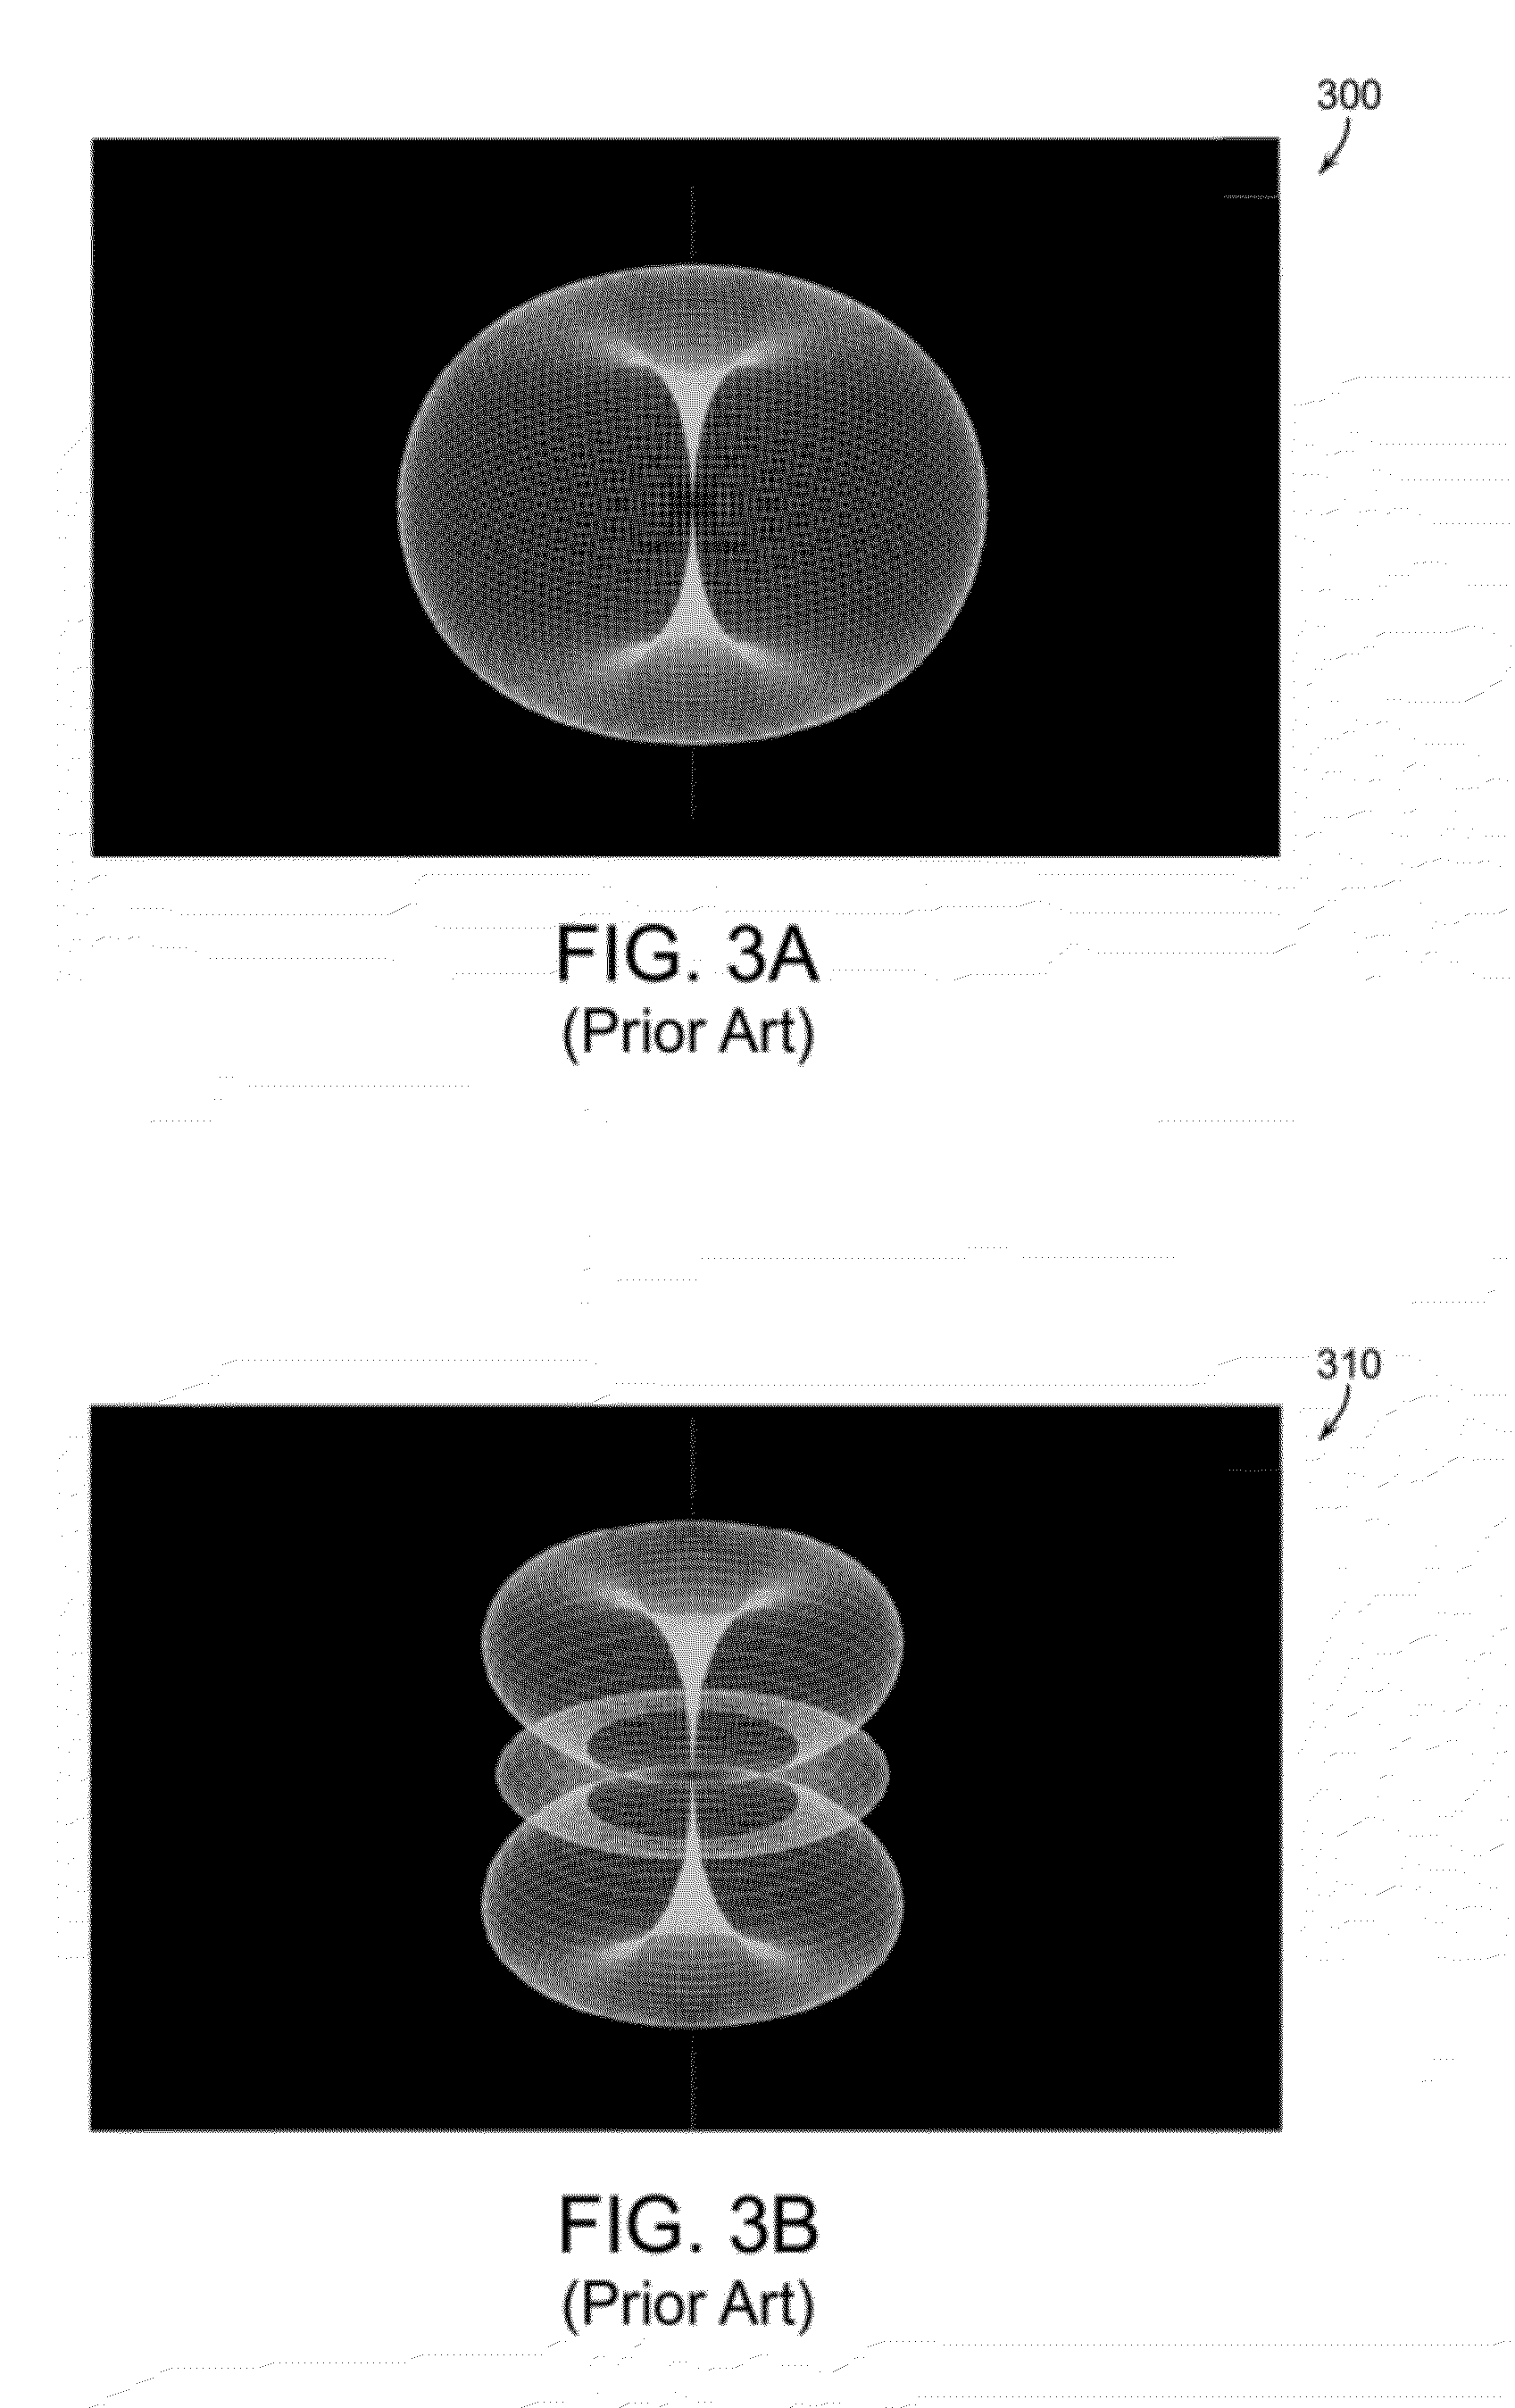 End-Fed Sleeve Dipole Antenna Comprising a 3/4-Wave Transformer